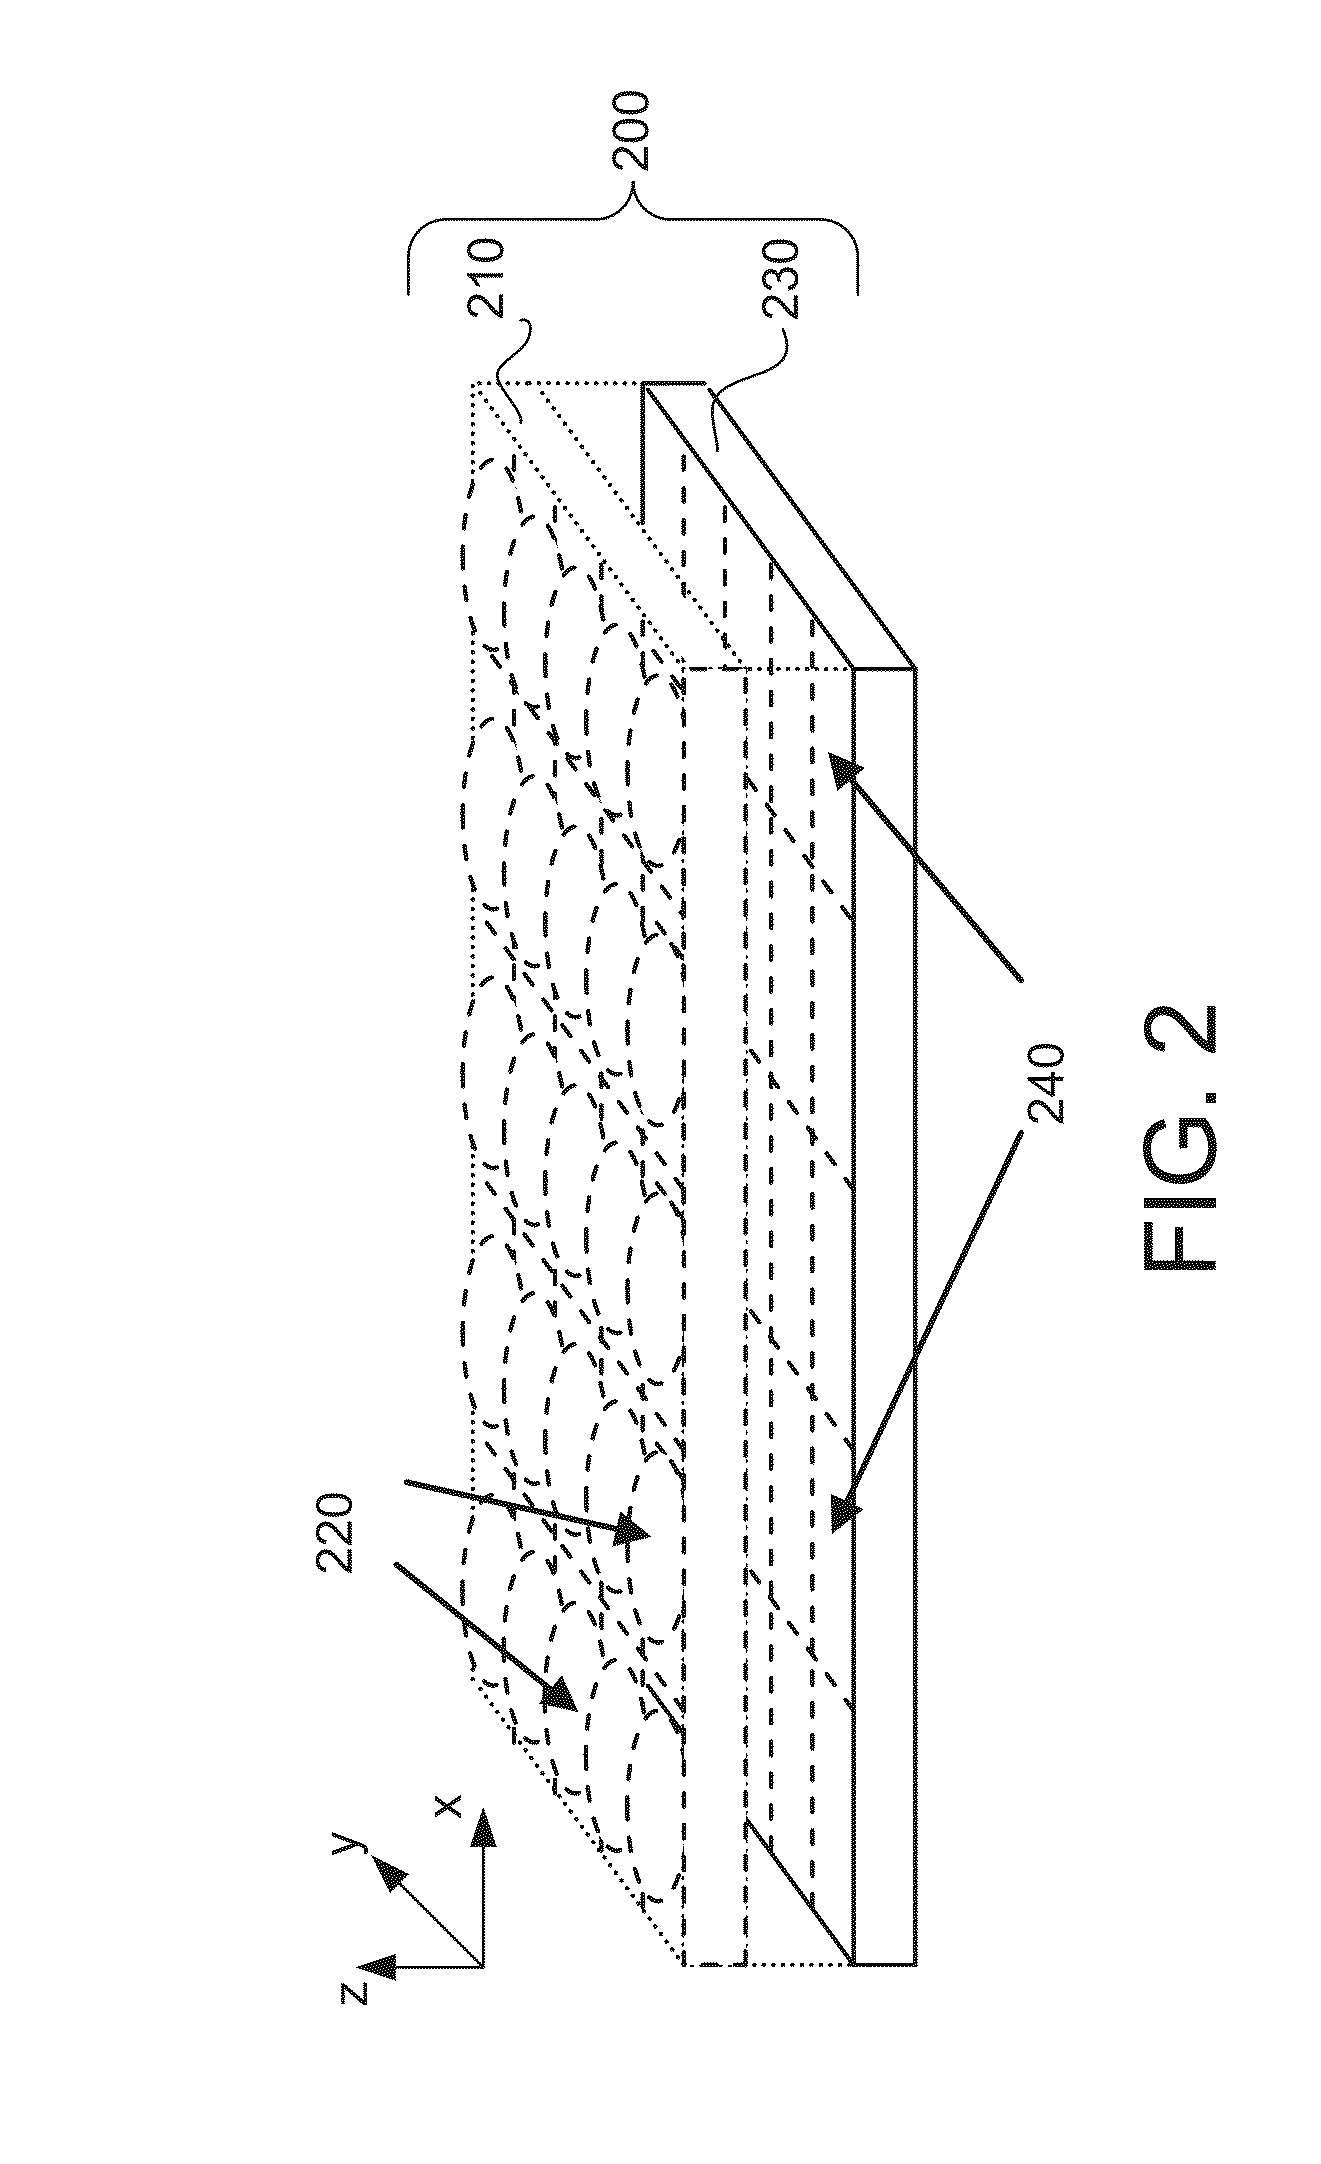 Systems and methods for determining depth from multiple views of a scene that include aliasing using hypothesized fusion